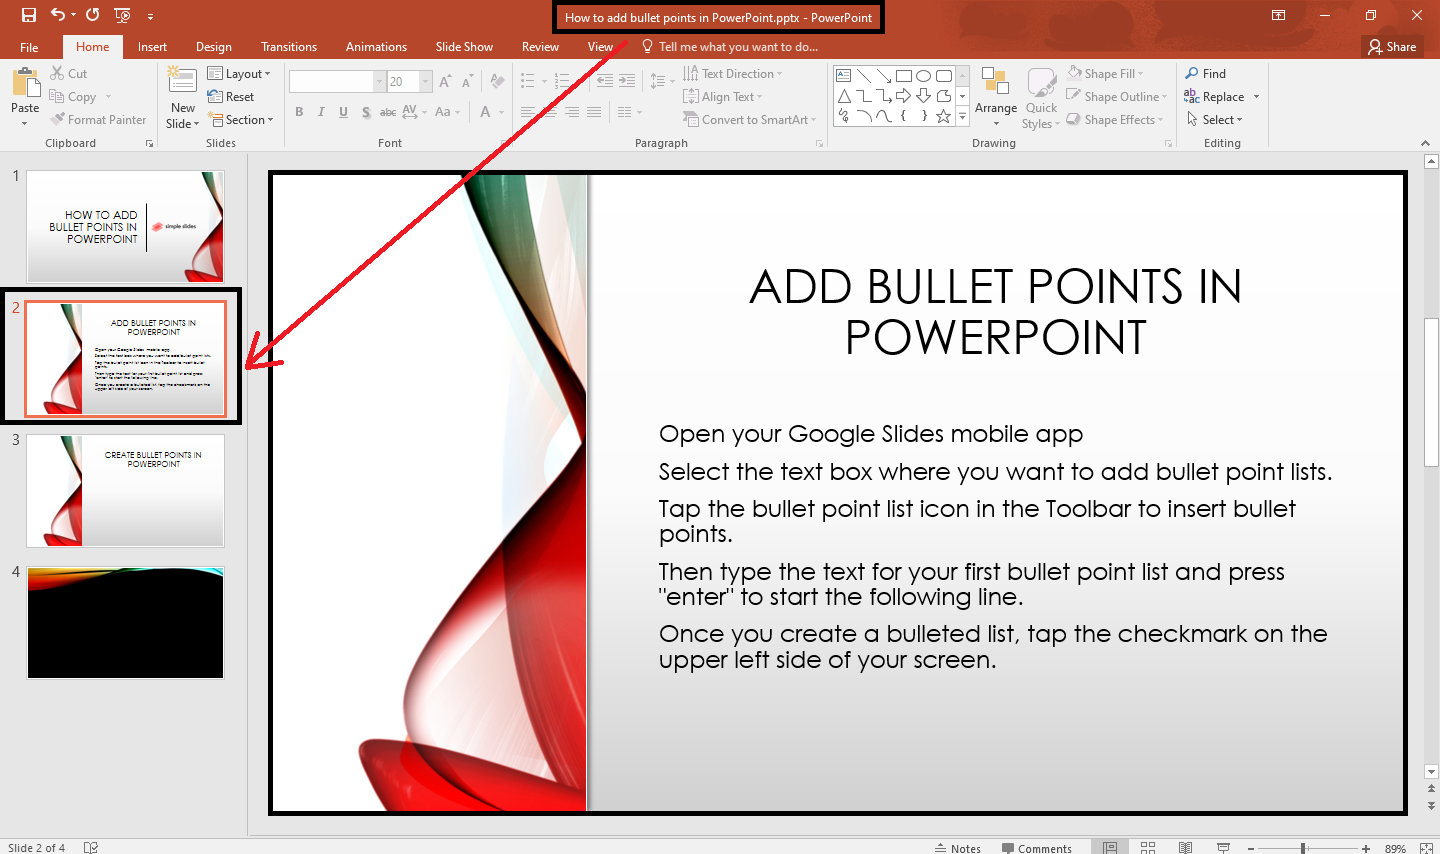 Open your PowerPoint presentationand select a slide on your left side.